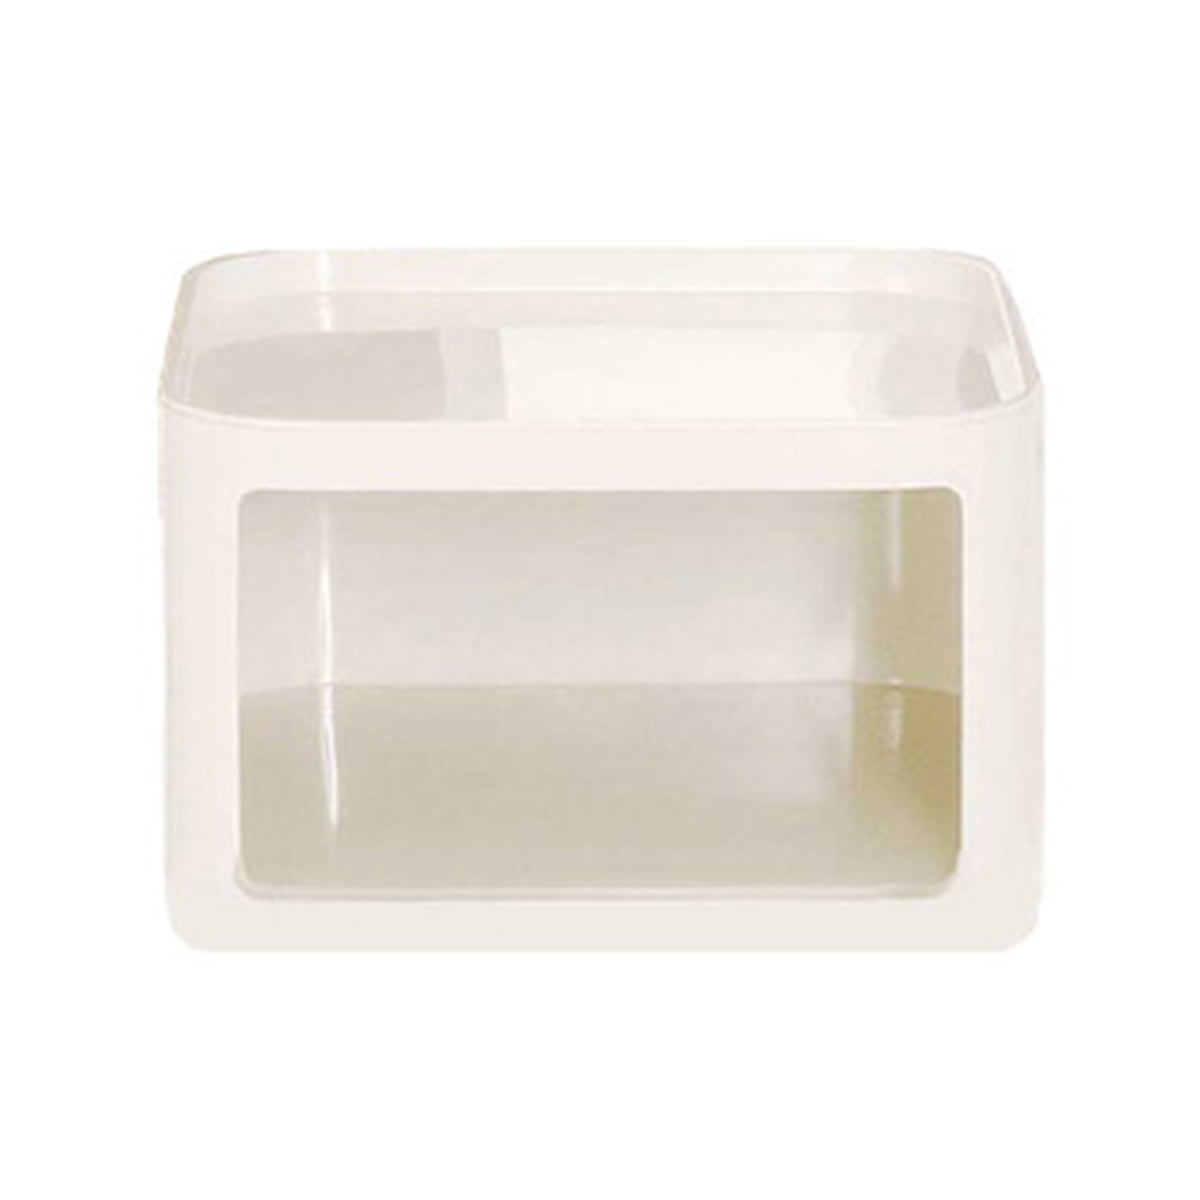 Kartell Kartell Componibili square white 4970 4979 table castors door tray collect sk7 